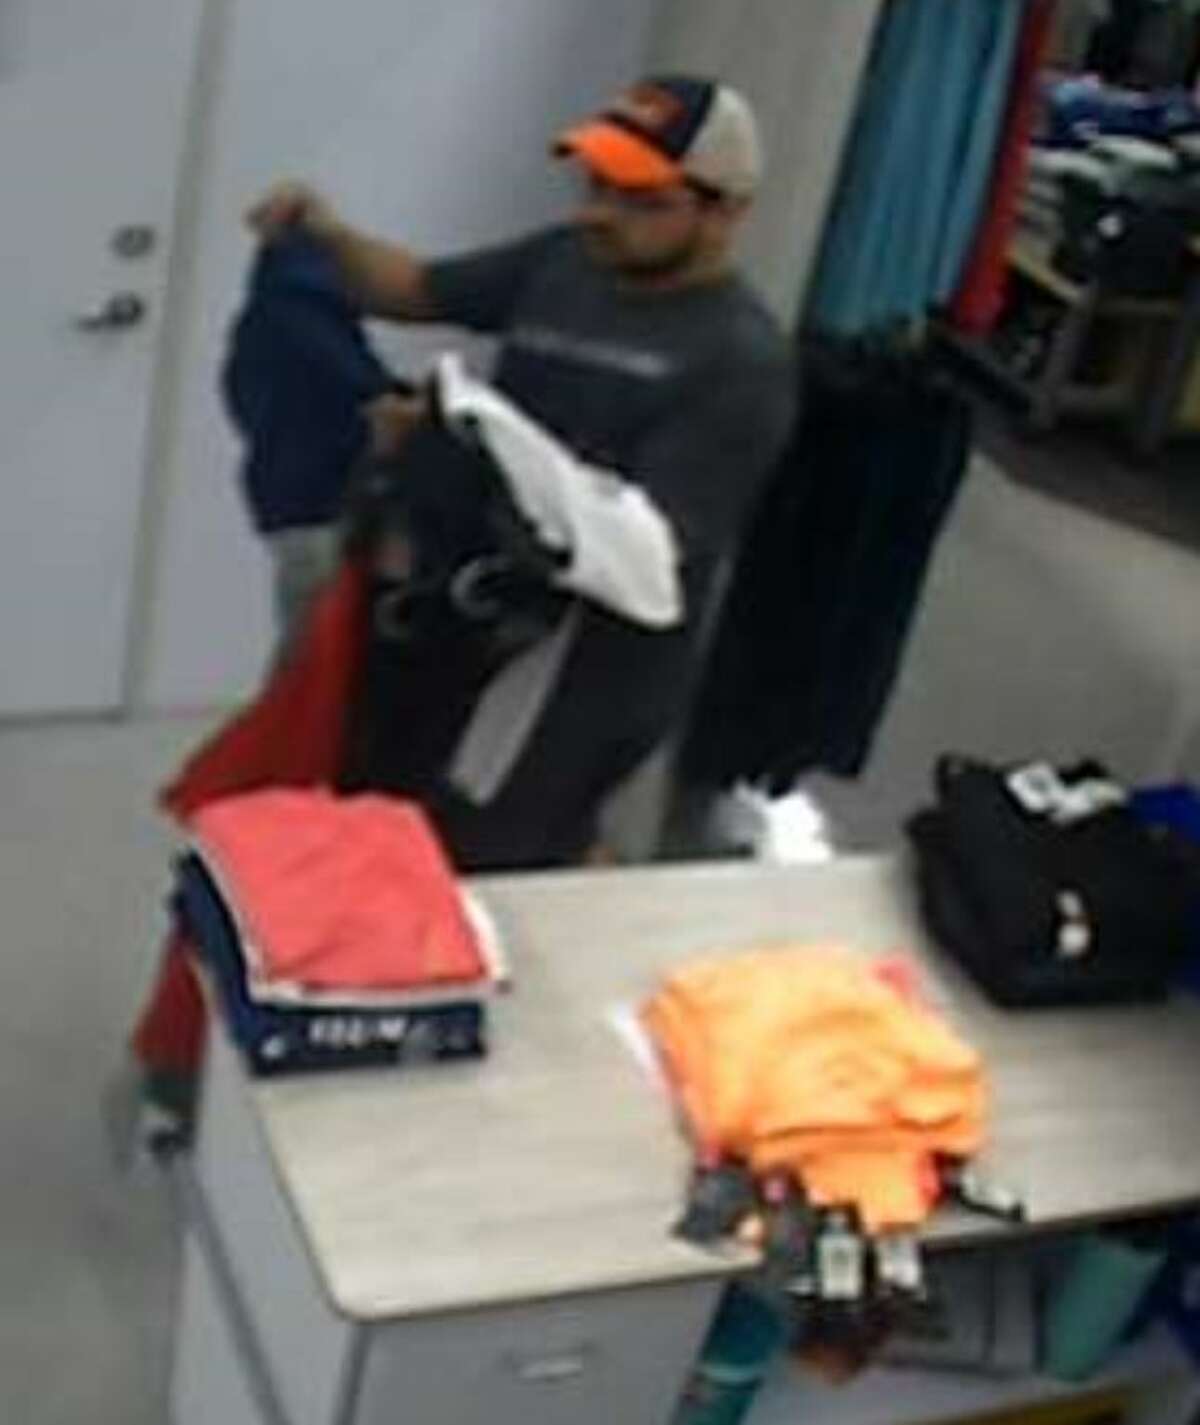 San Antonio police need help identifying a suspect who allegedly took pictures of two women in the Acadmey store dressing room at 11650 Bandera Road on Oct. 31.